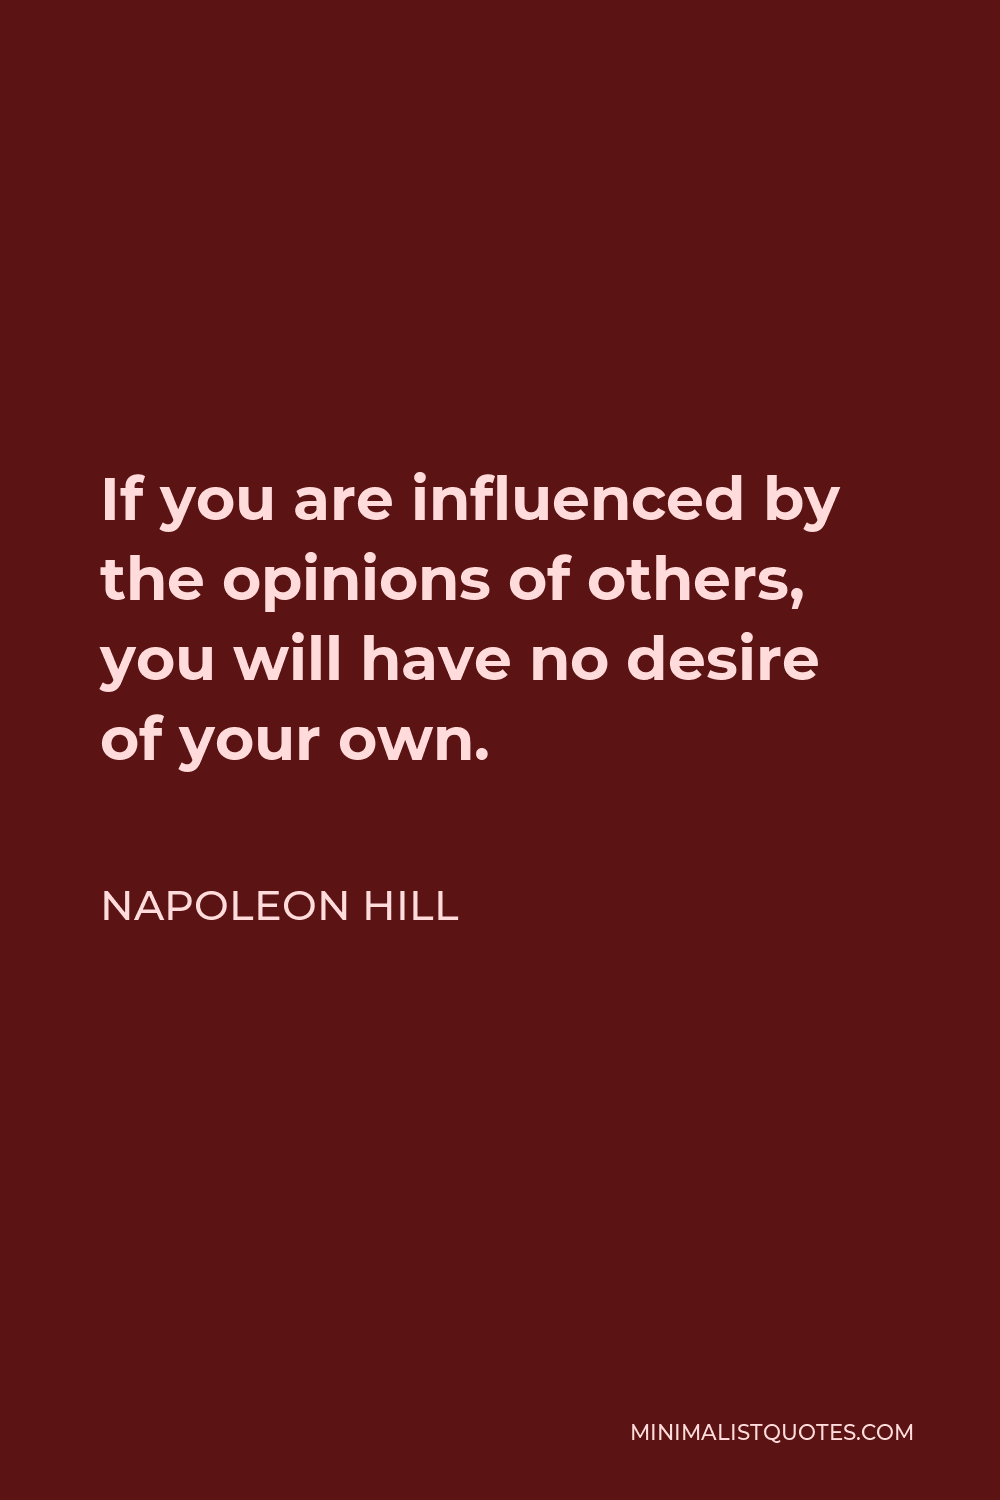 Napoleon Hill Quote - If you are influenced by the opinions of others, you will have no desire of your own.